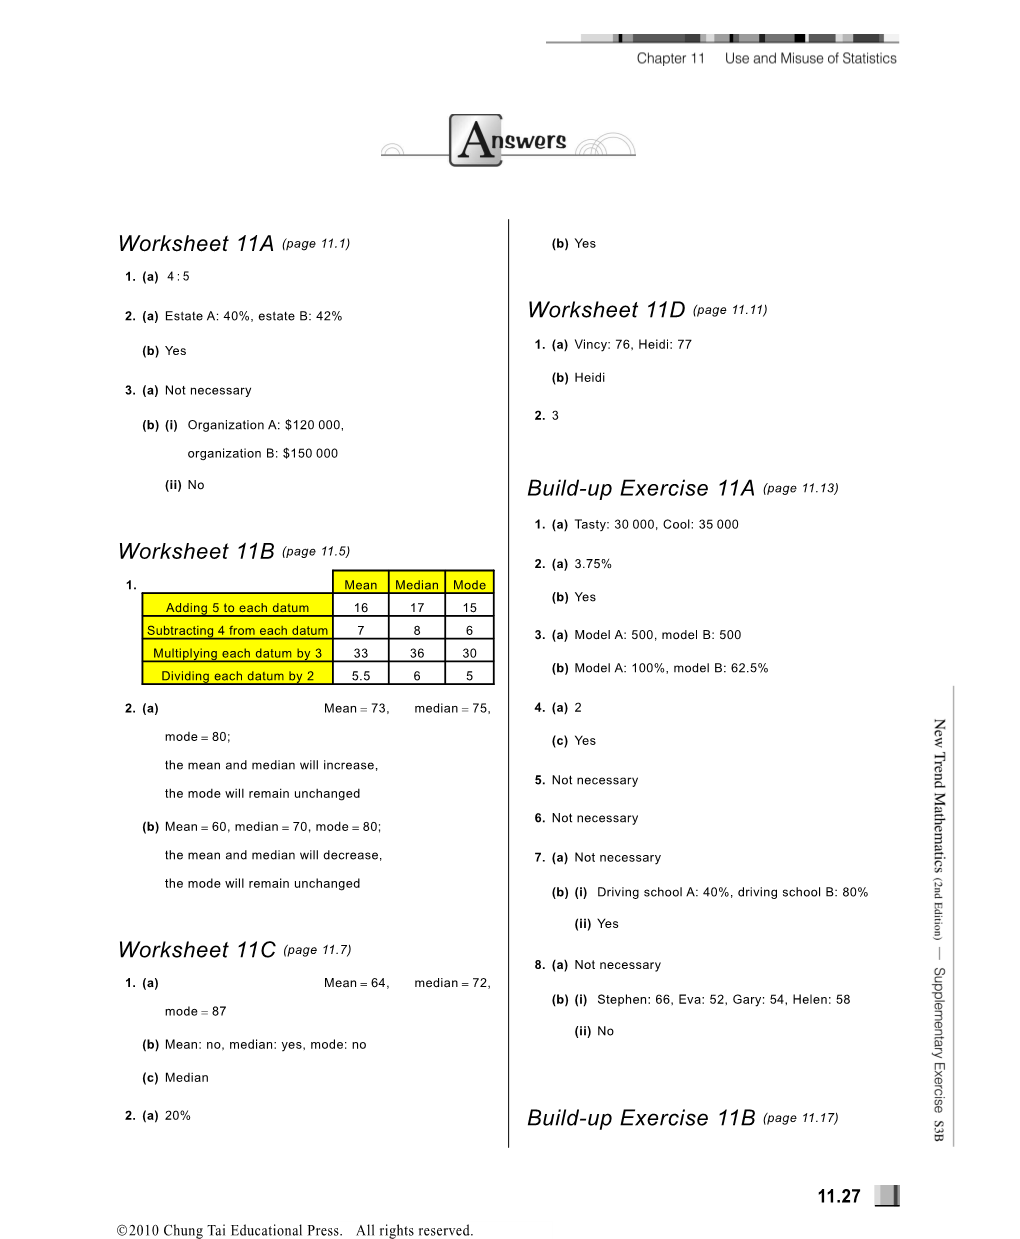 Worksheet 11A(Page 11.1)